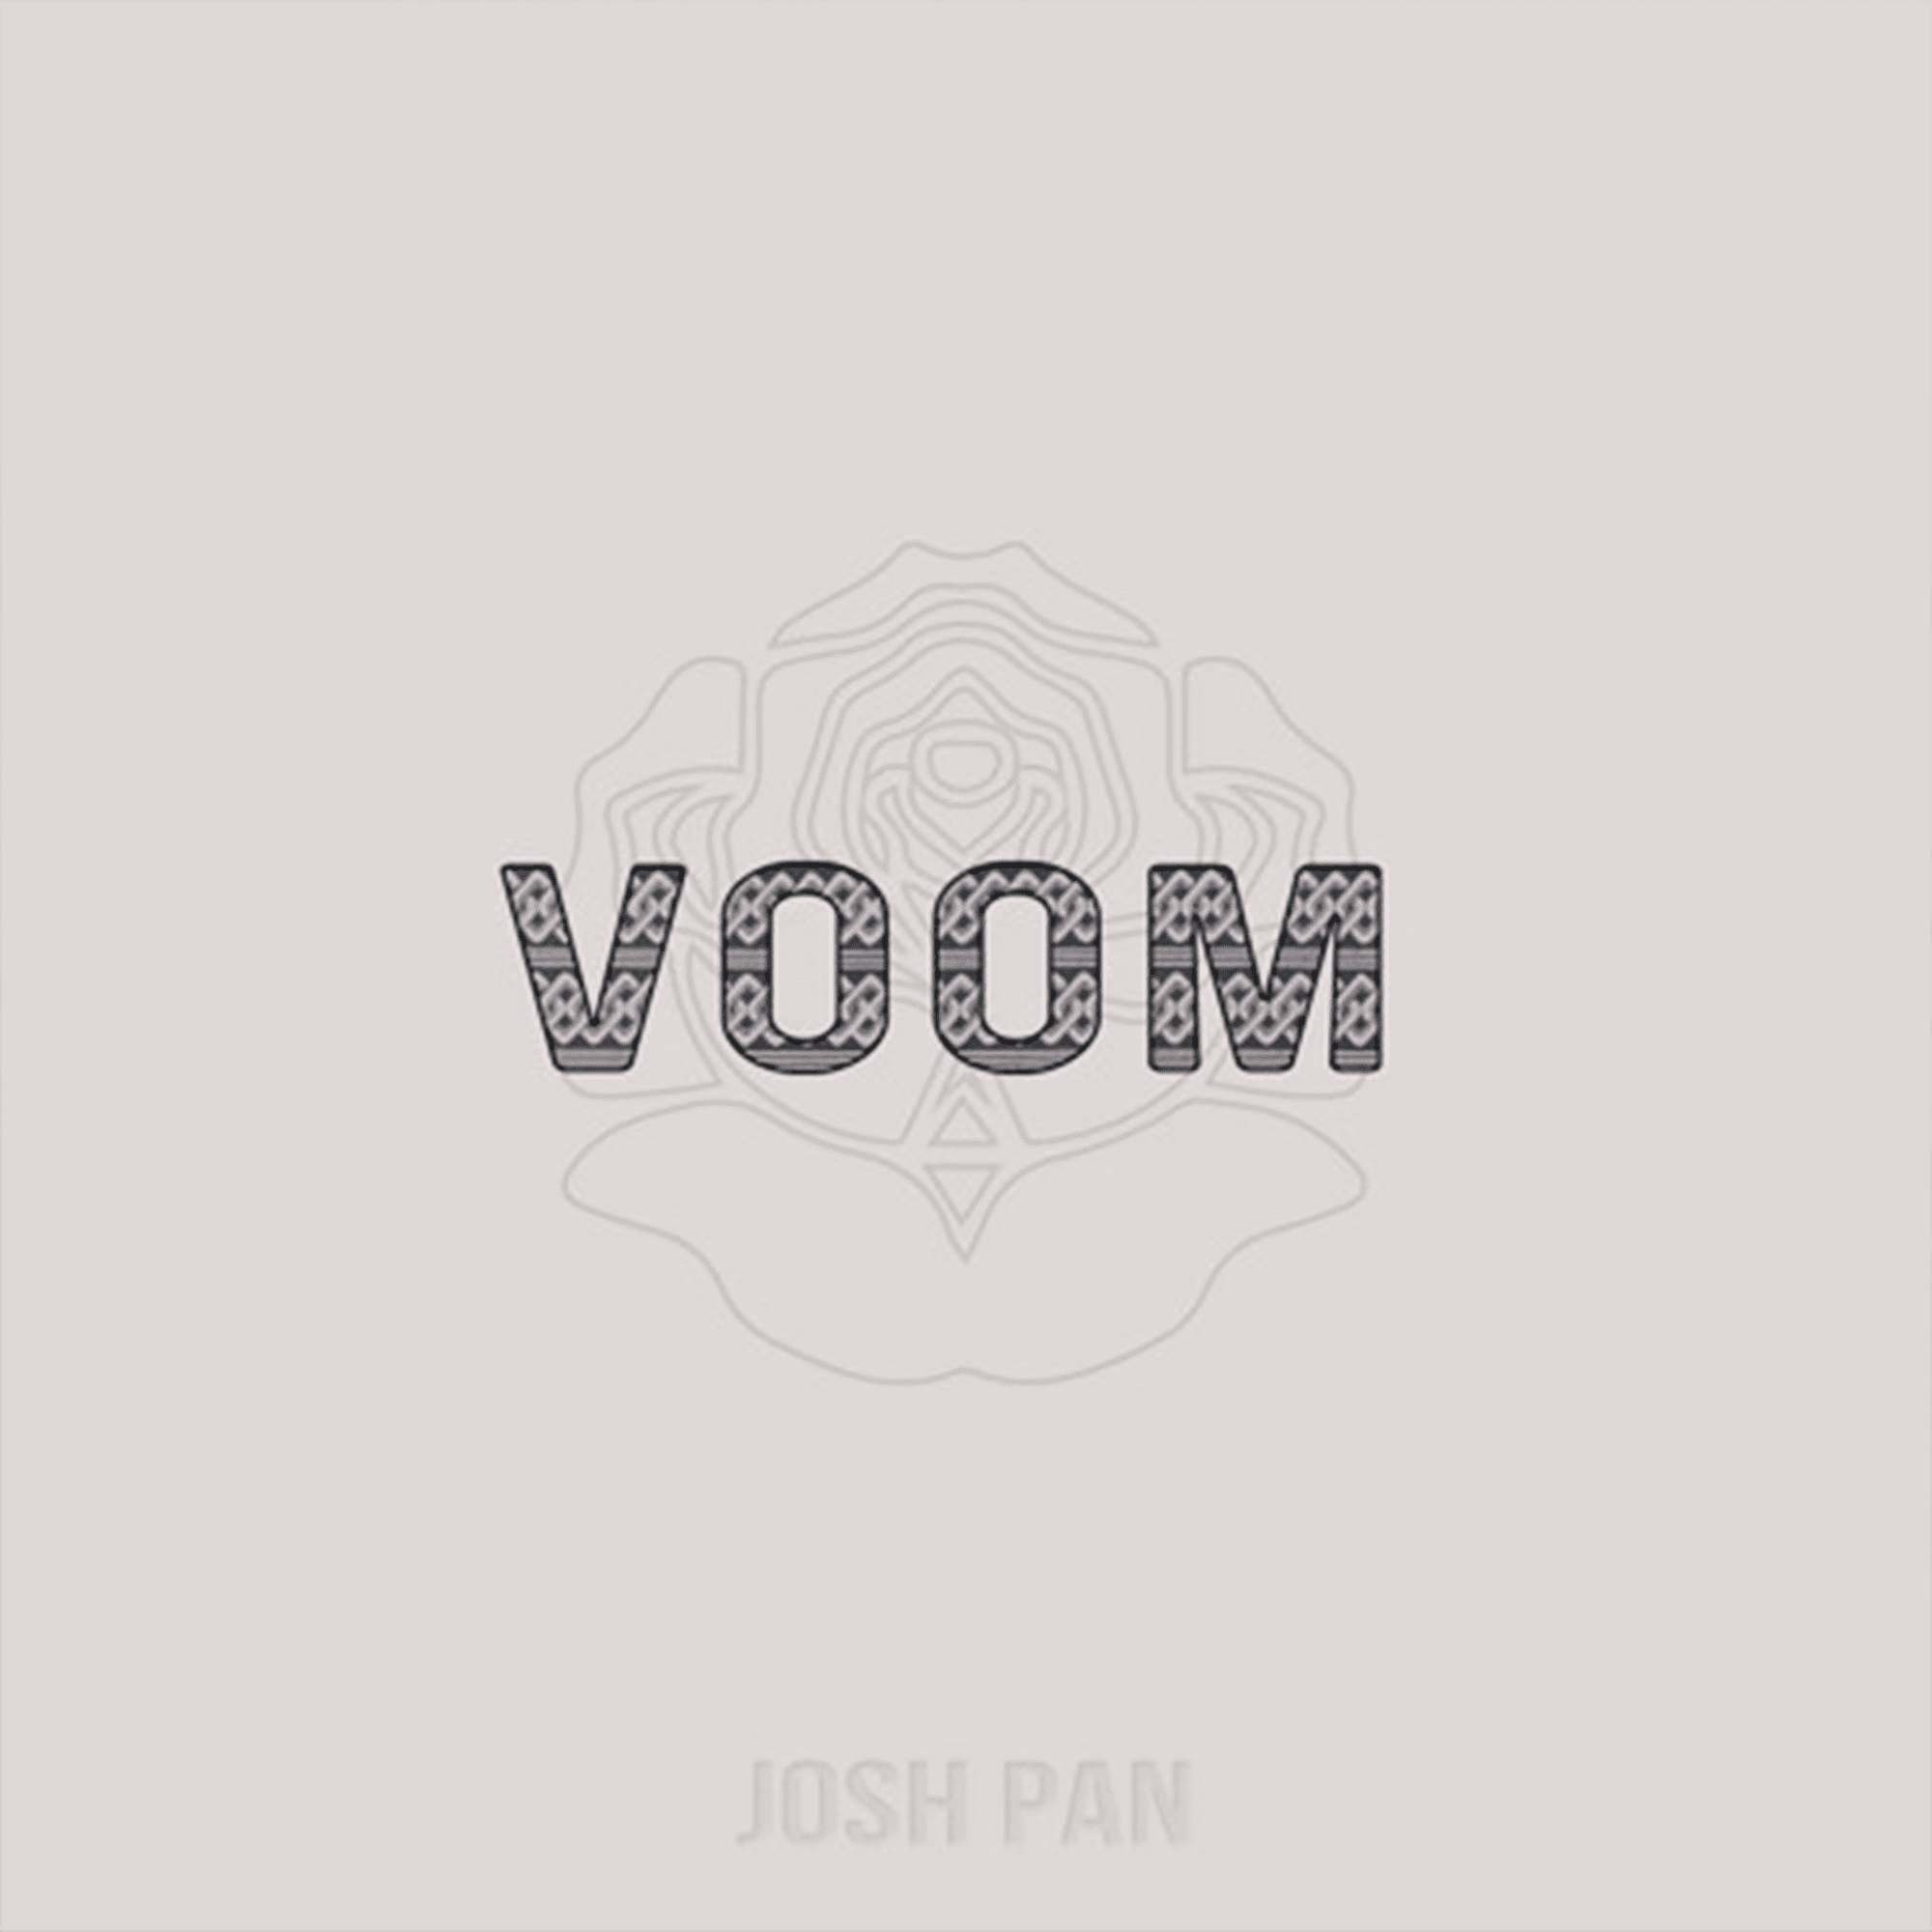 Cover art for VOOM by josh pan